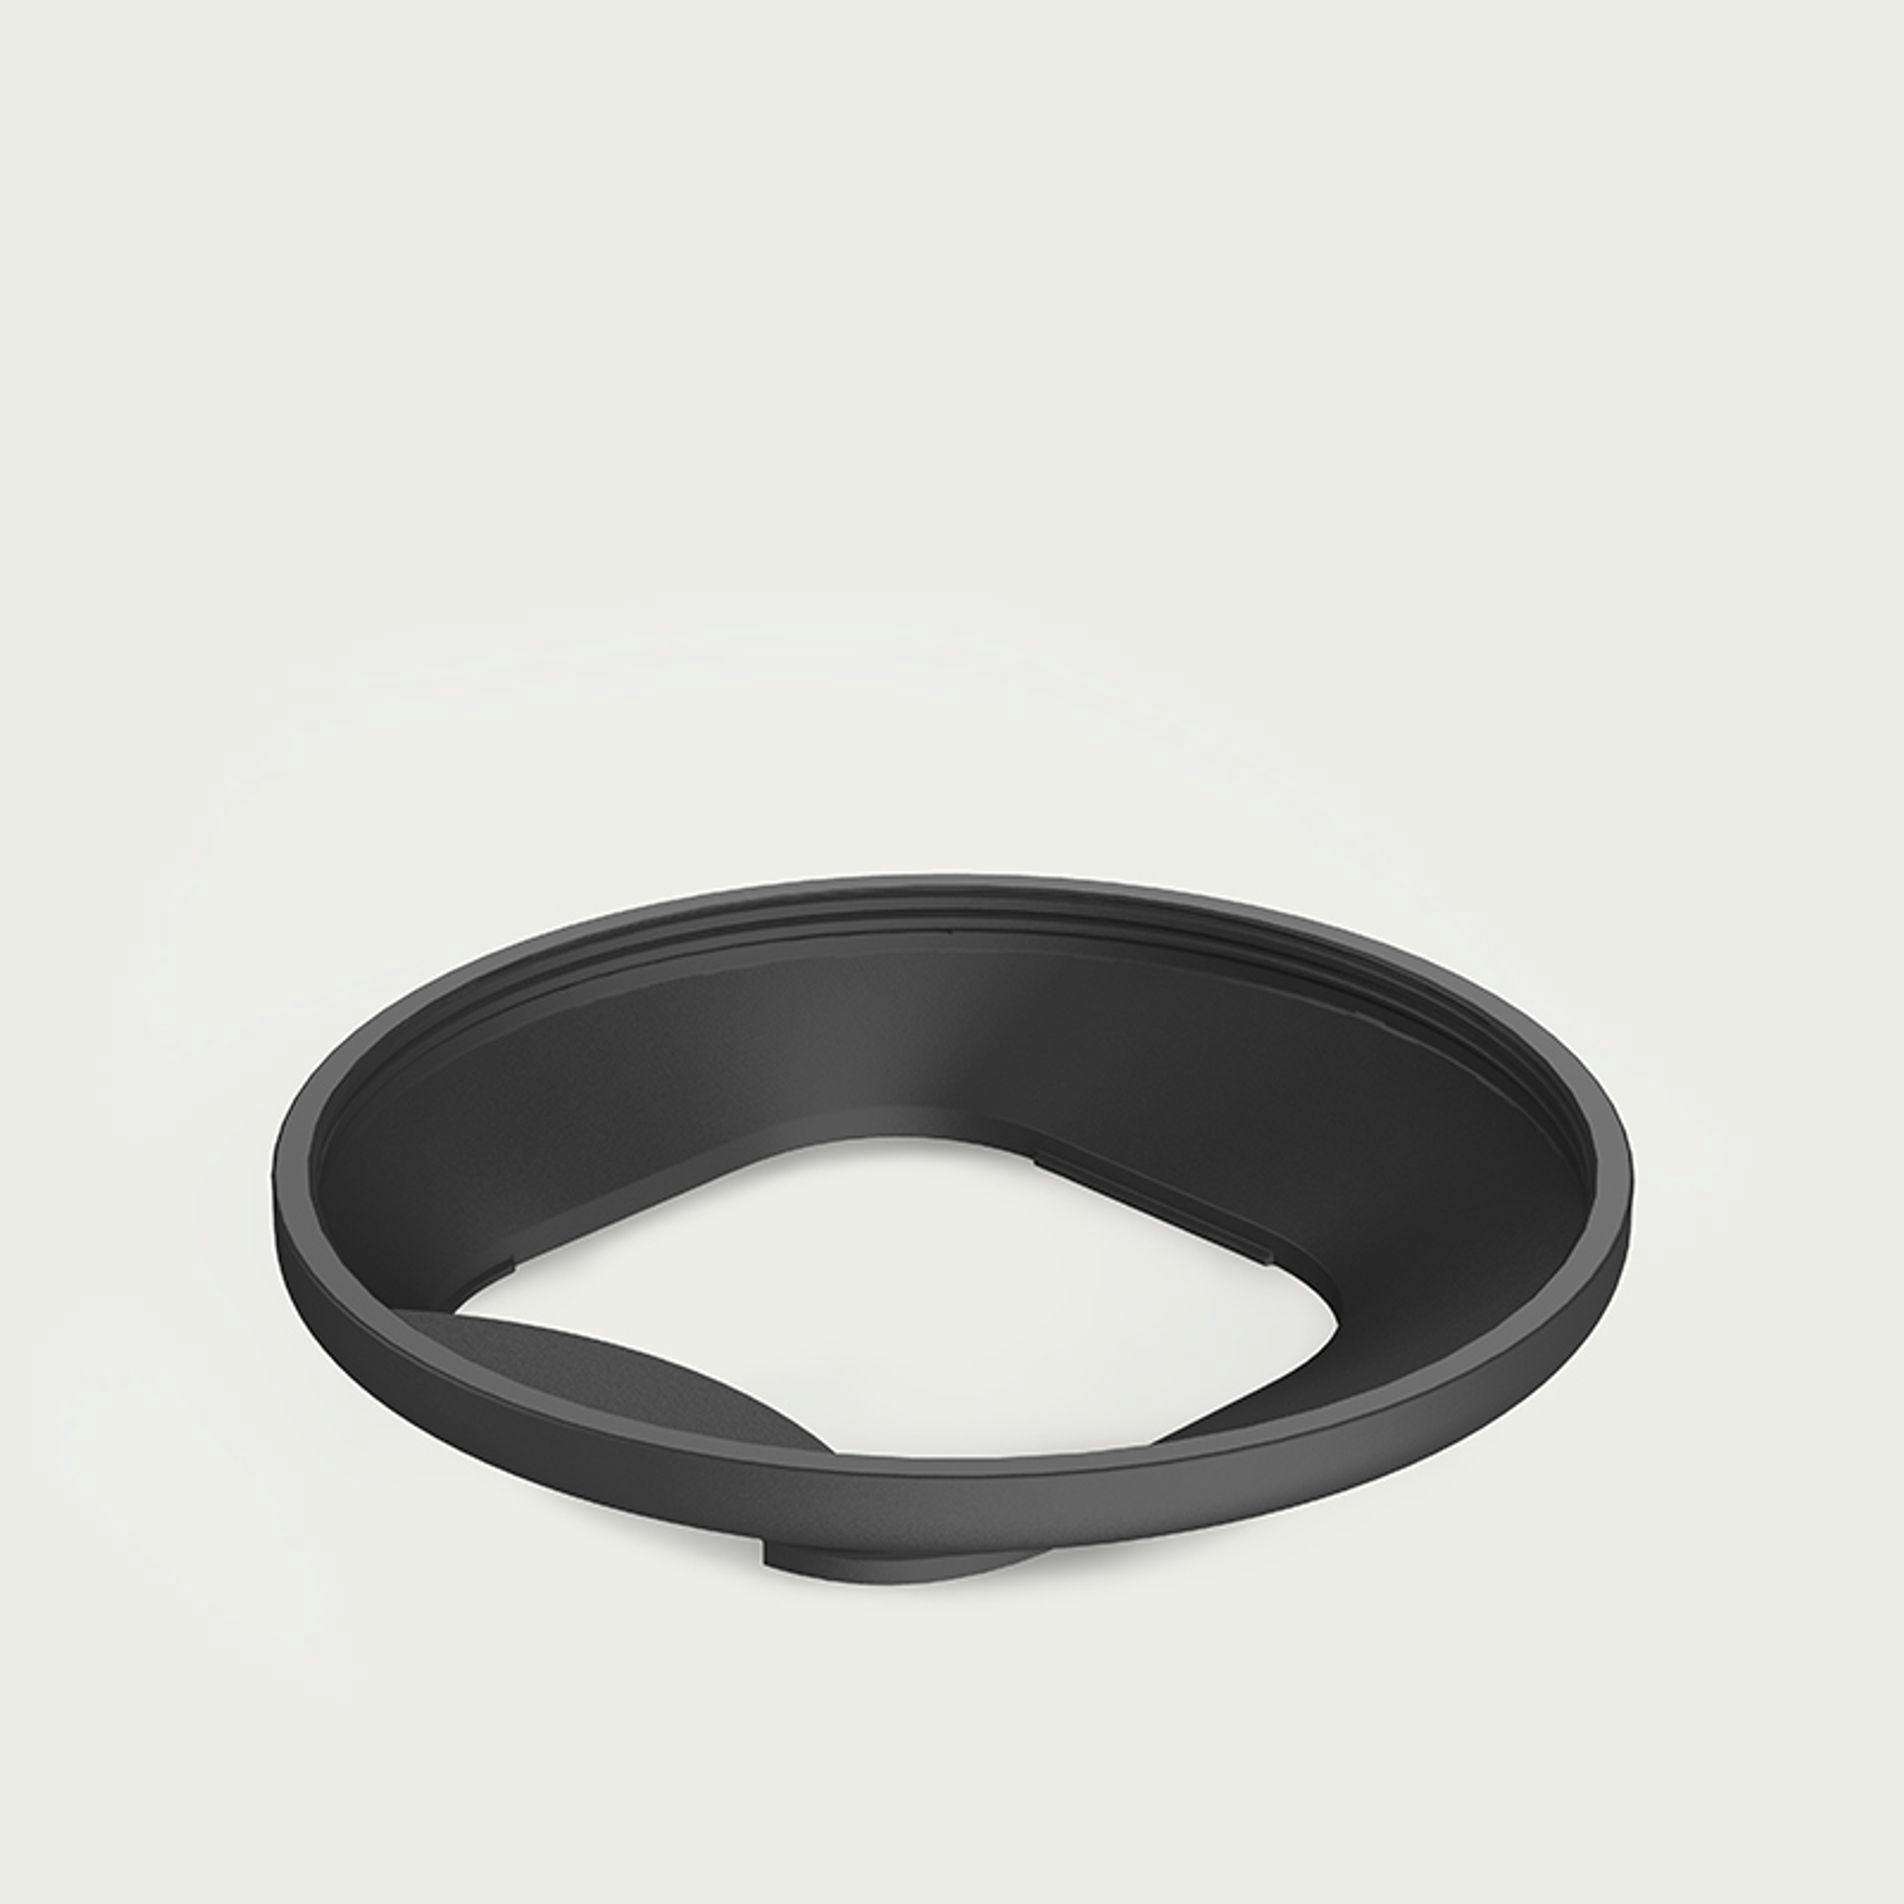 67mm Snap-On Filter Adapter for iPhone 14 Pro & Pro Max